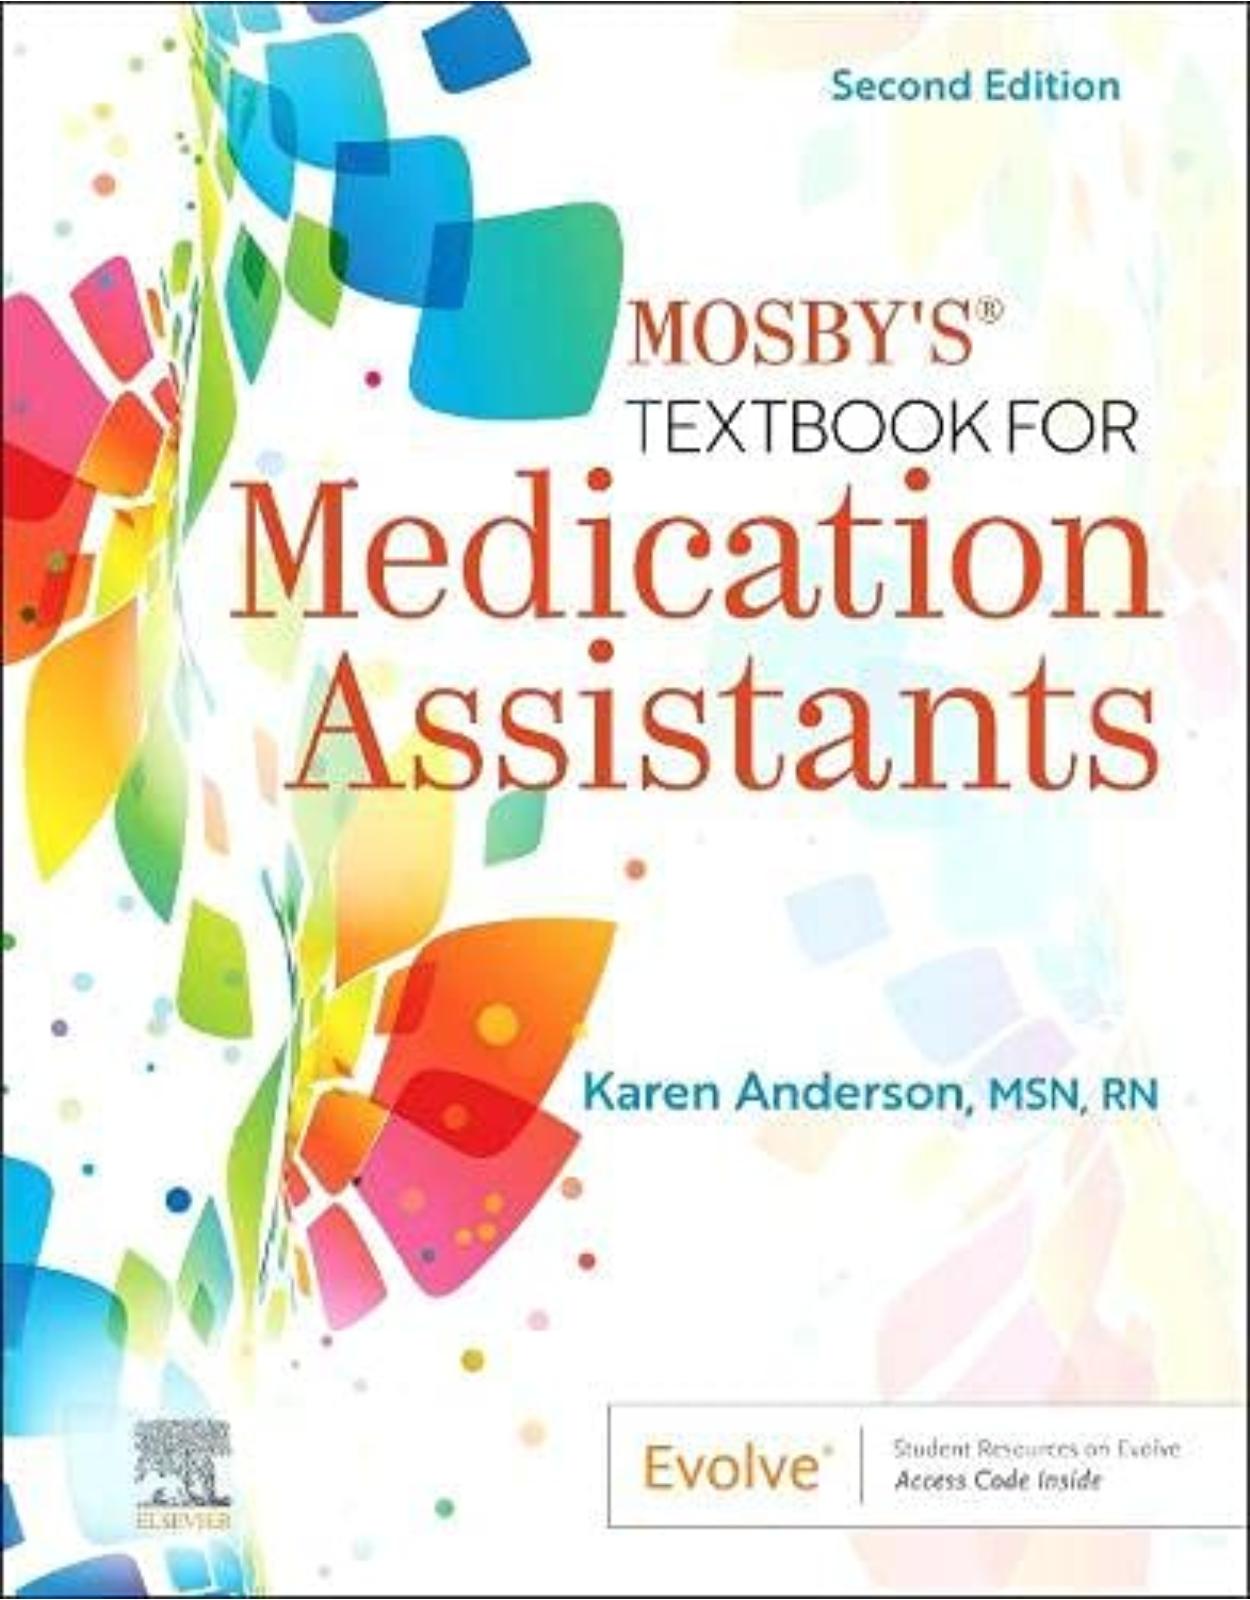 Mosby’s Textbook for Medication Assistants